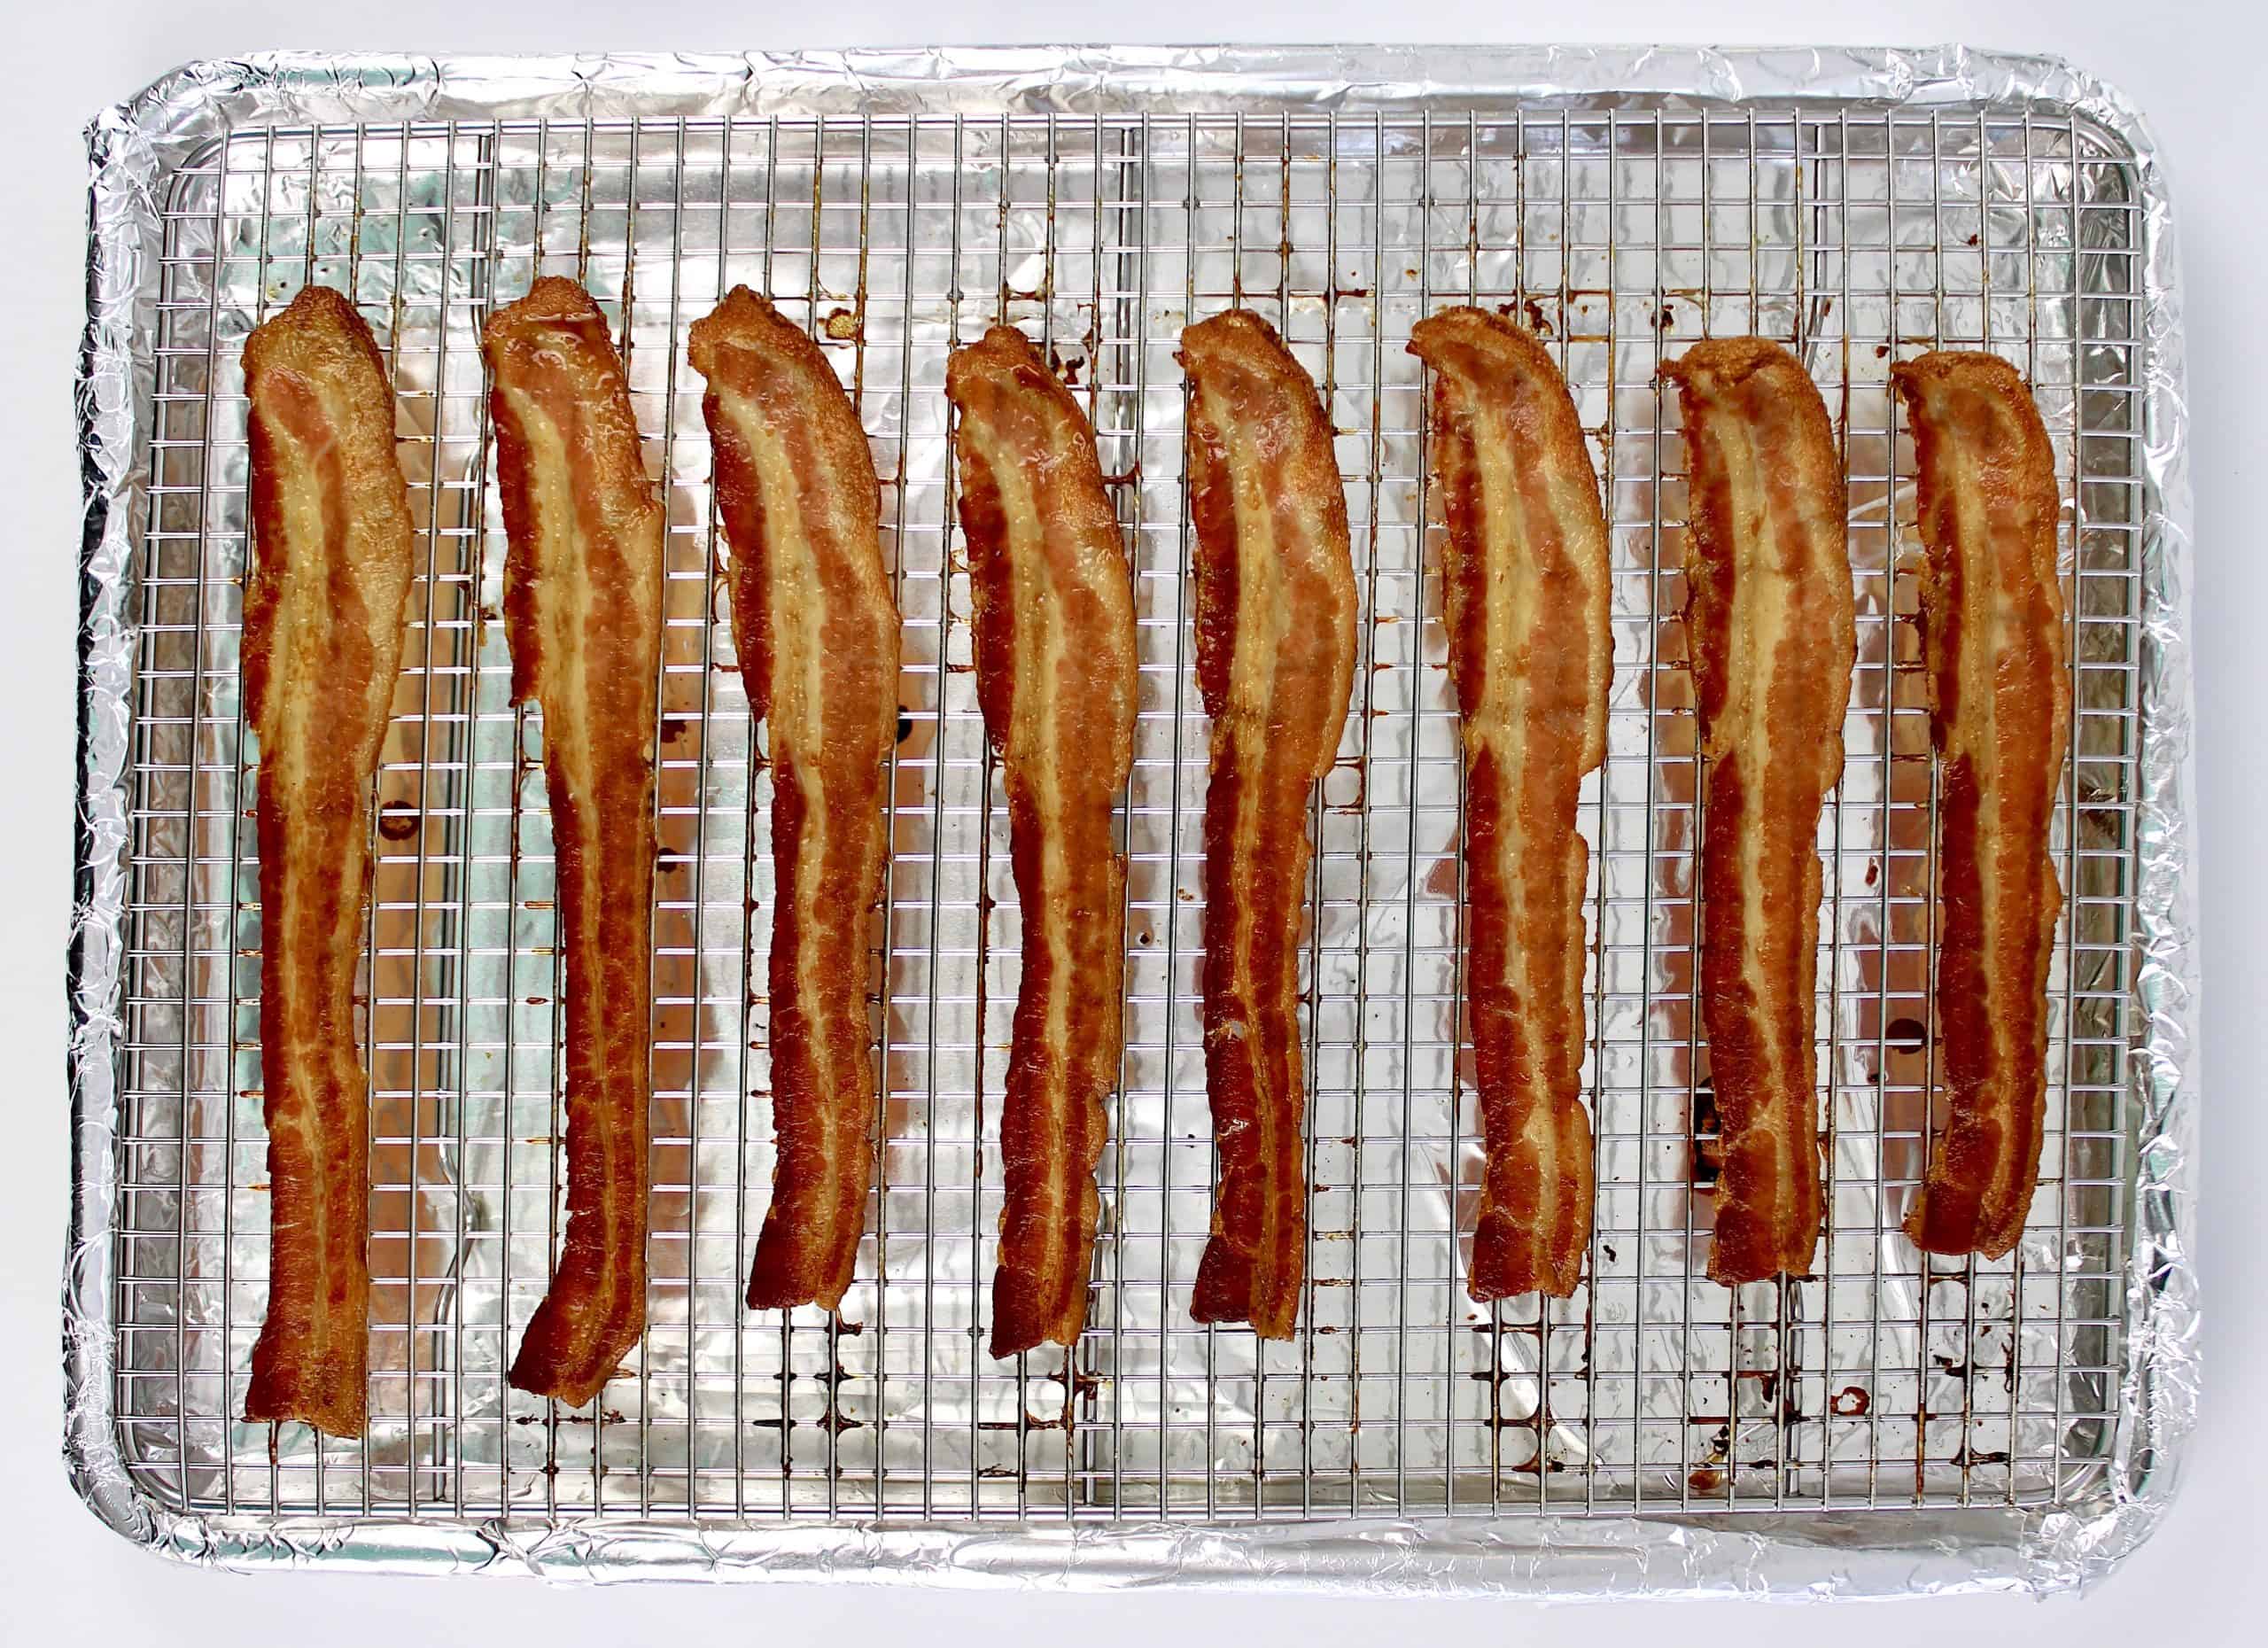 slices of cooked bacon on wire rack